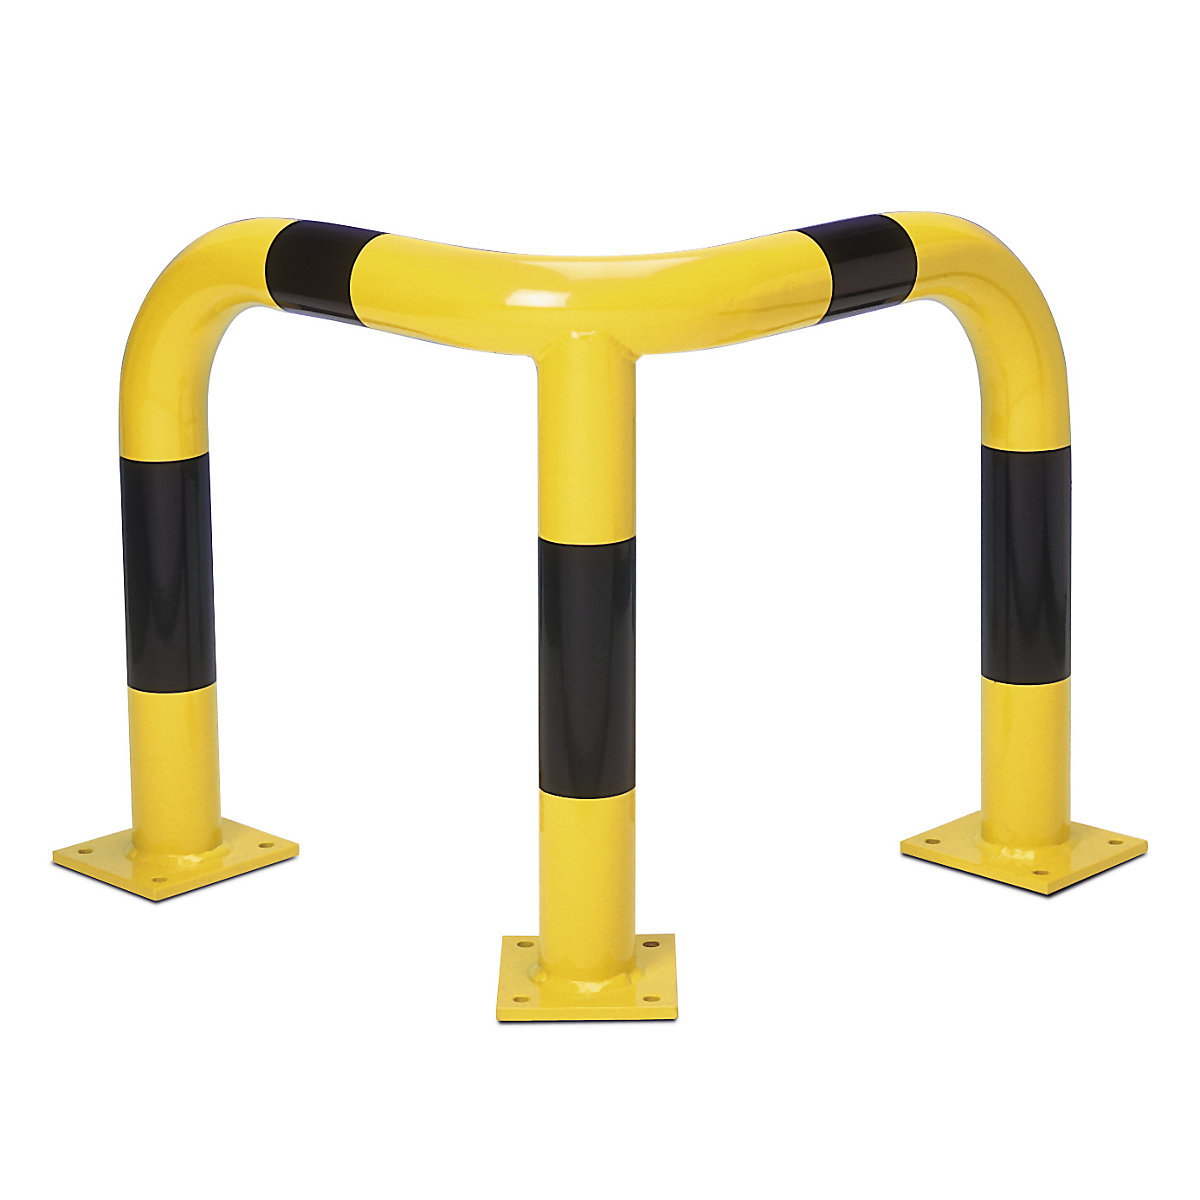 Crash protection corner, Ø 76 mm, for indoor use, height 600 mm, yellow/black